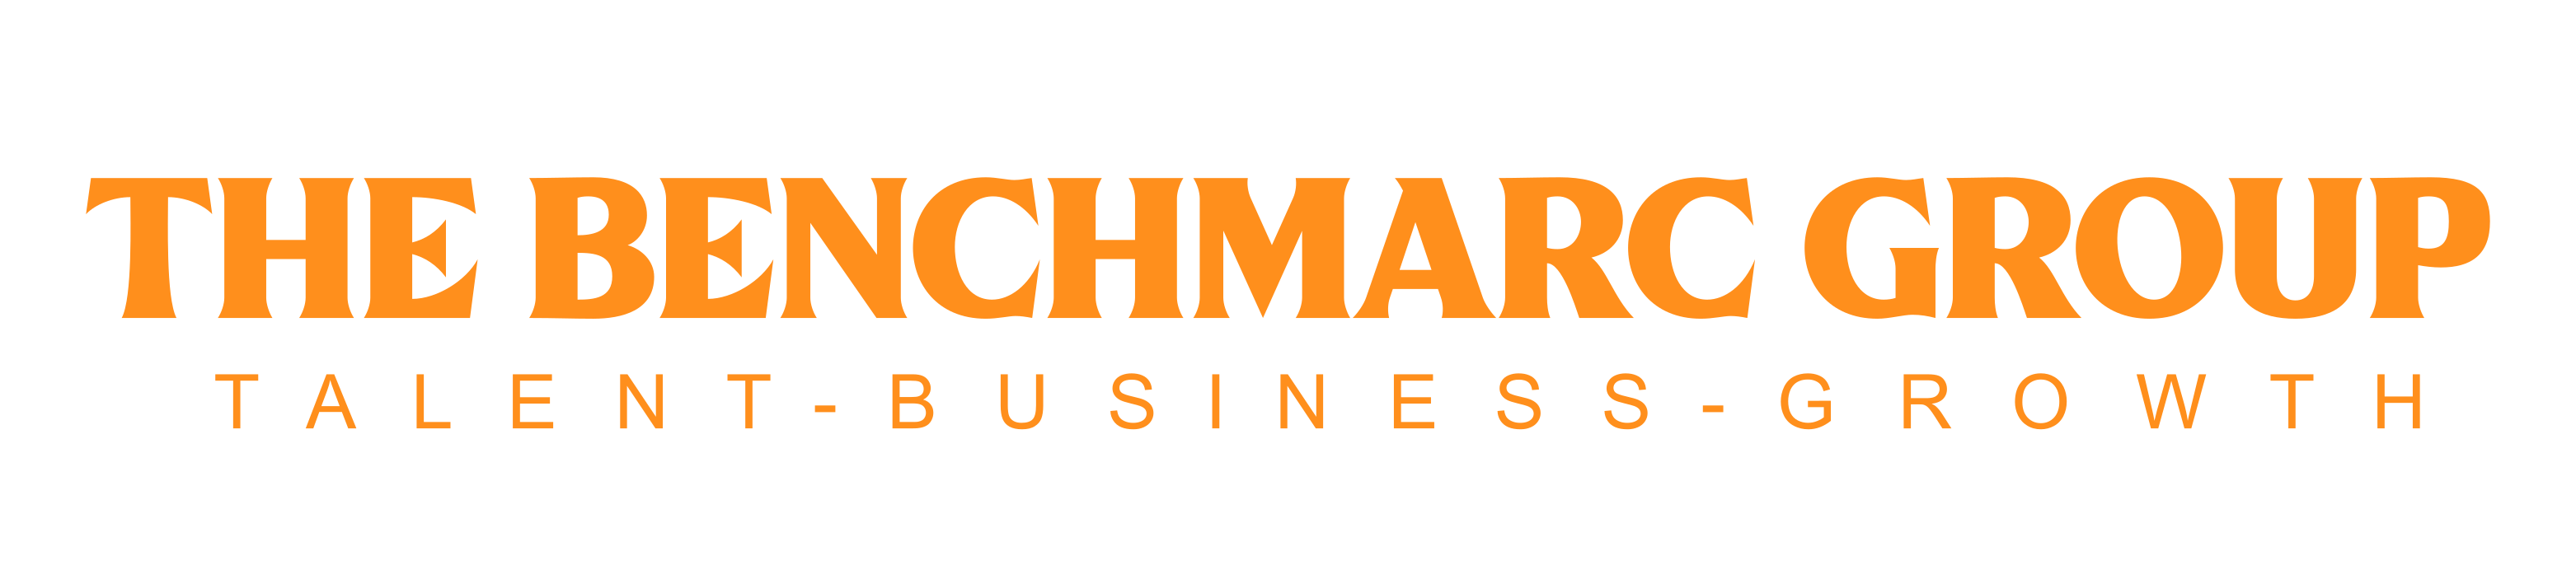 About Benchmarc Group